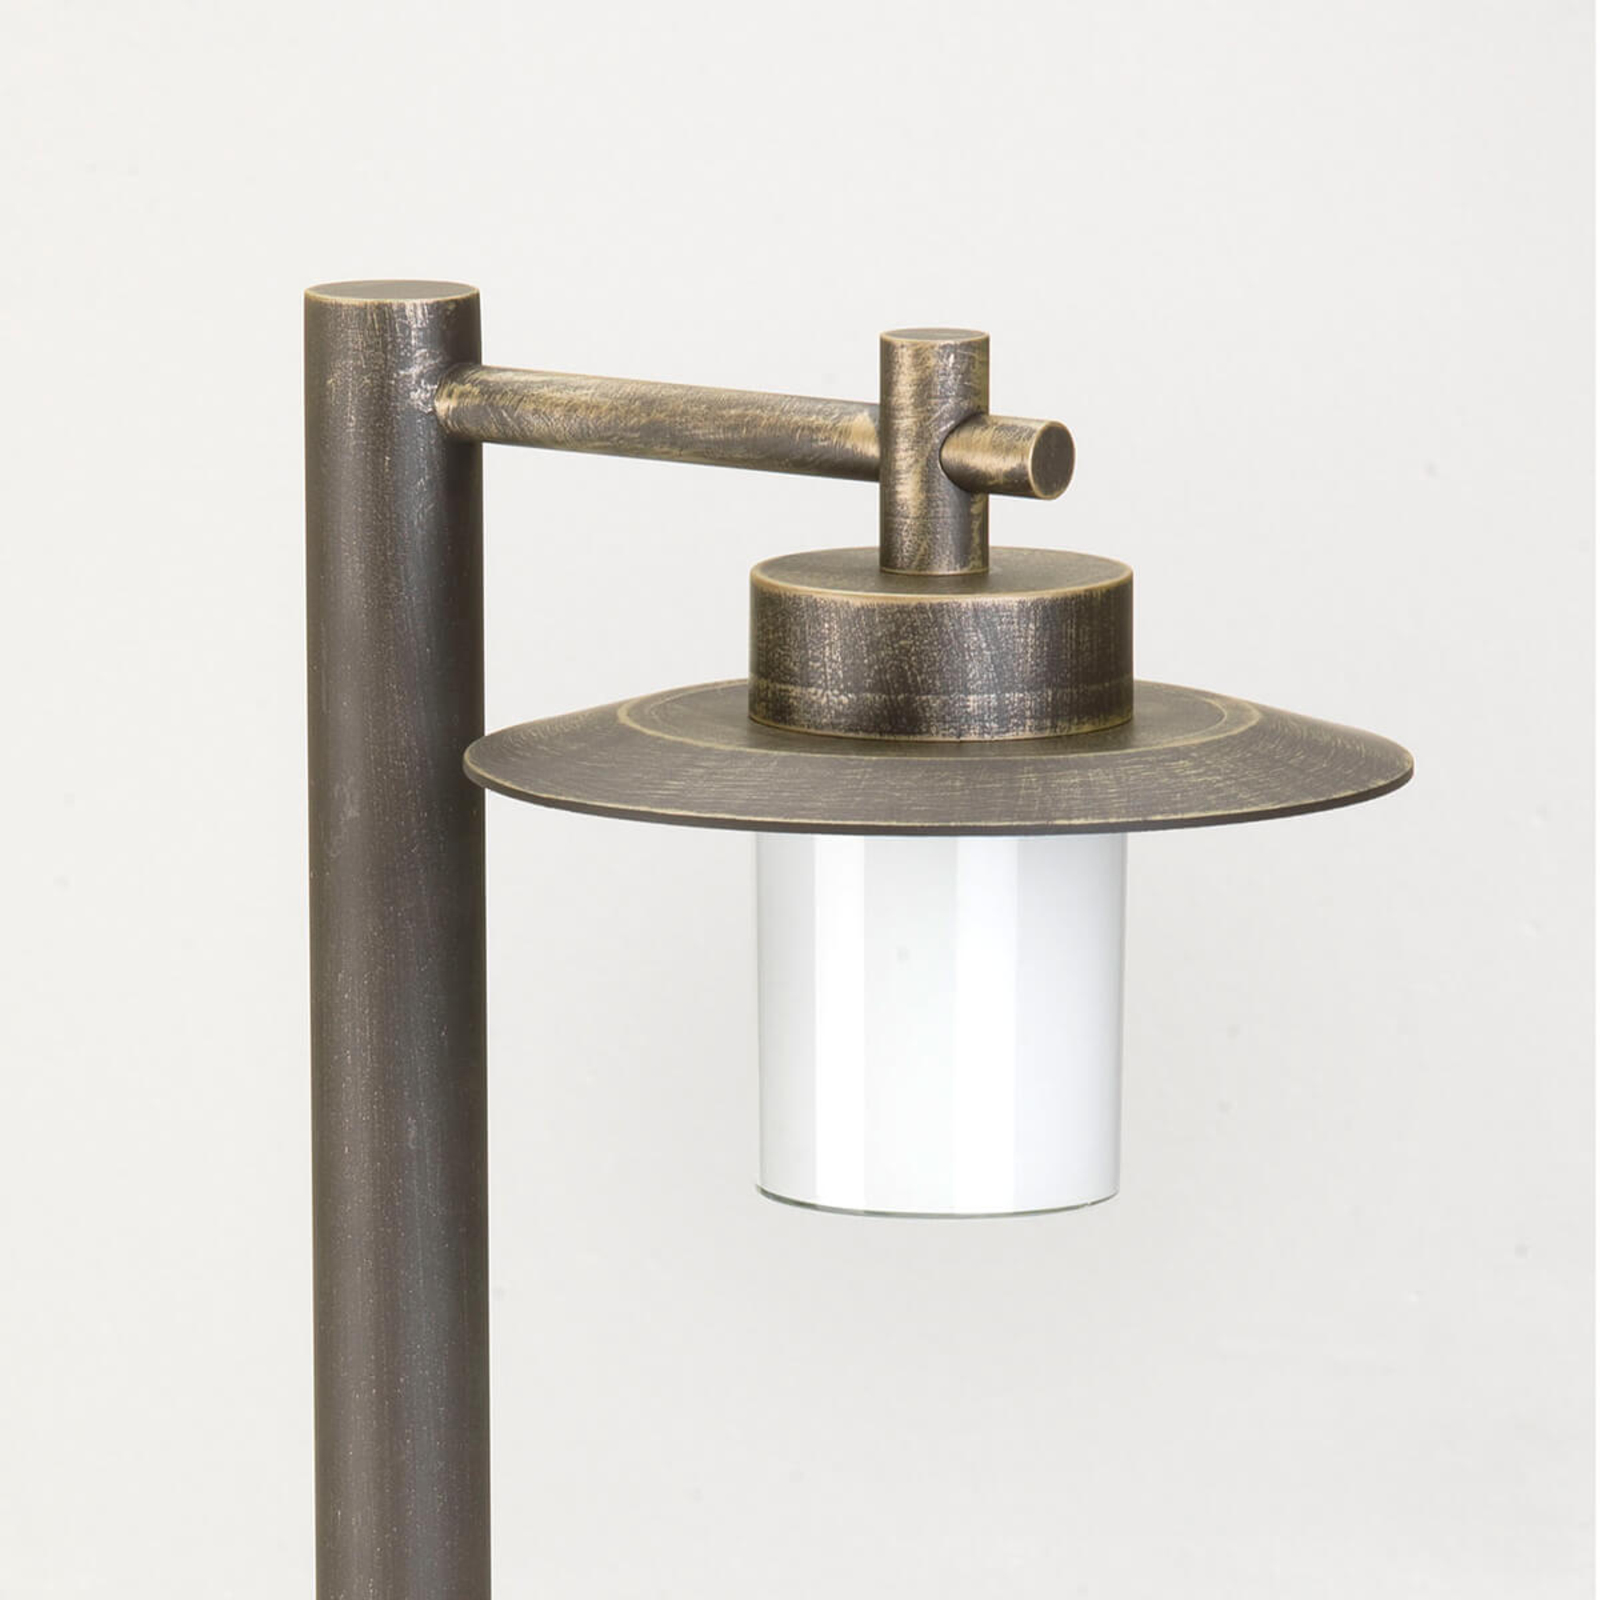 Modern country house style - Fiona path light